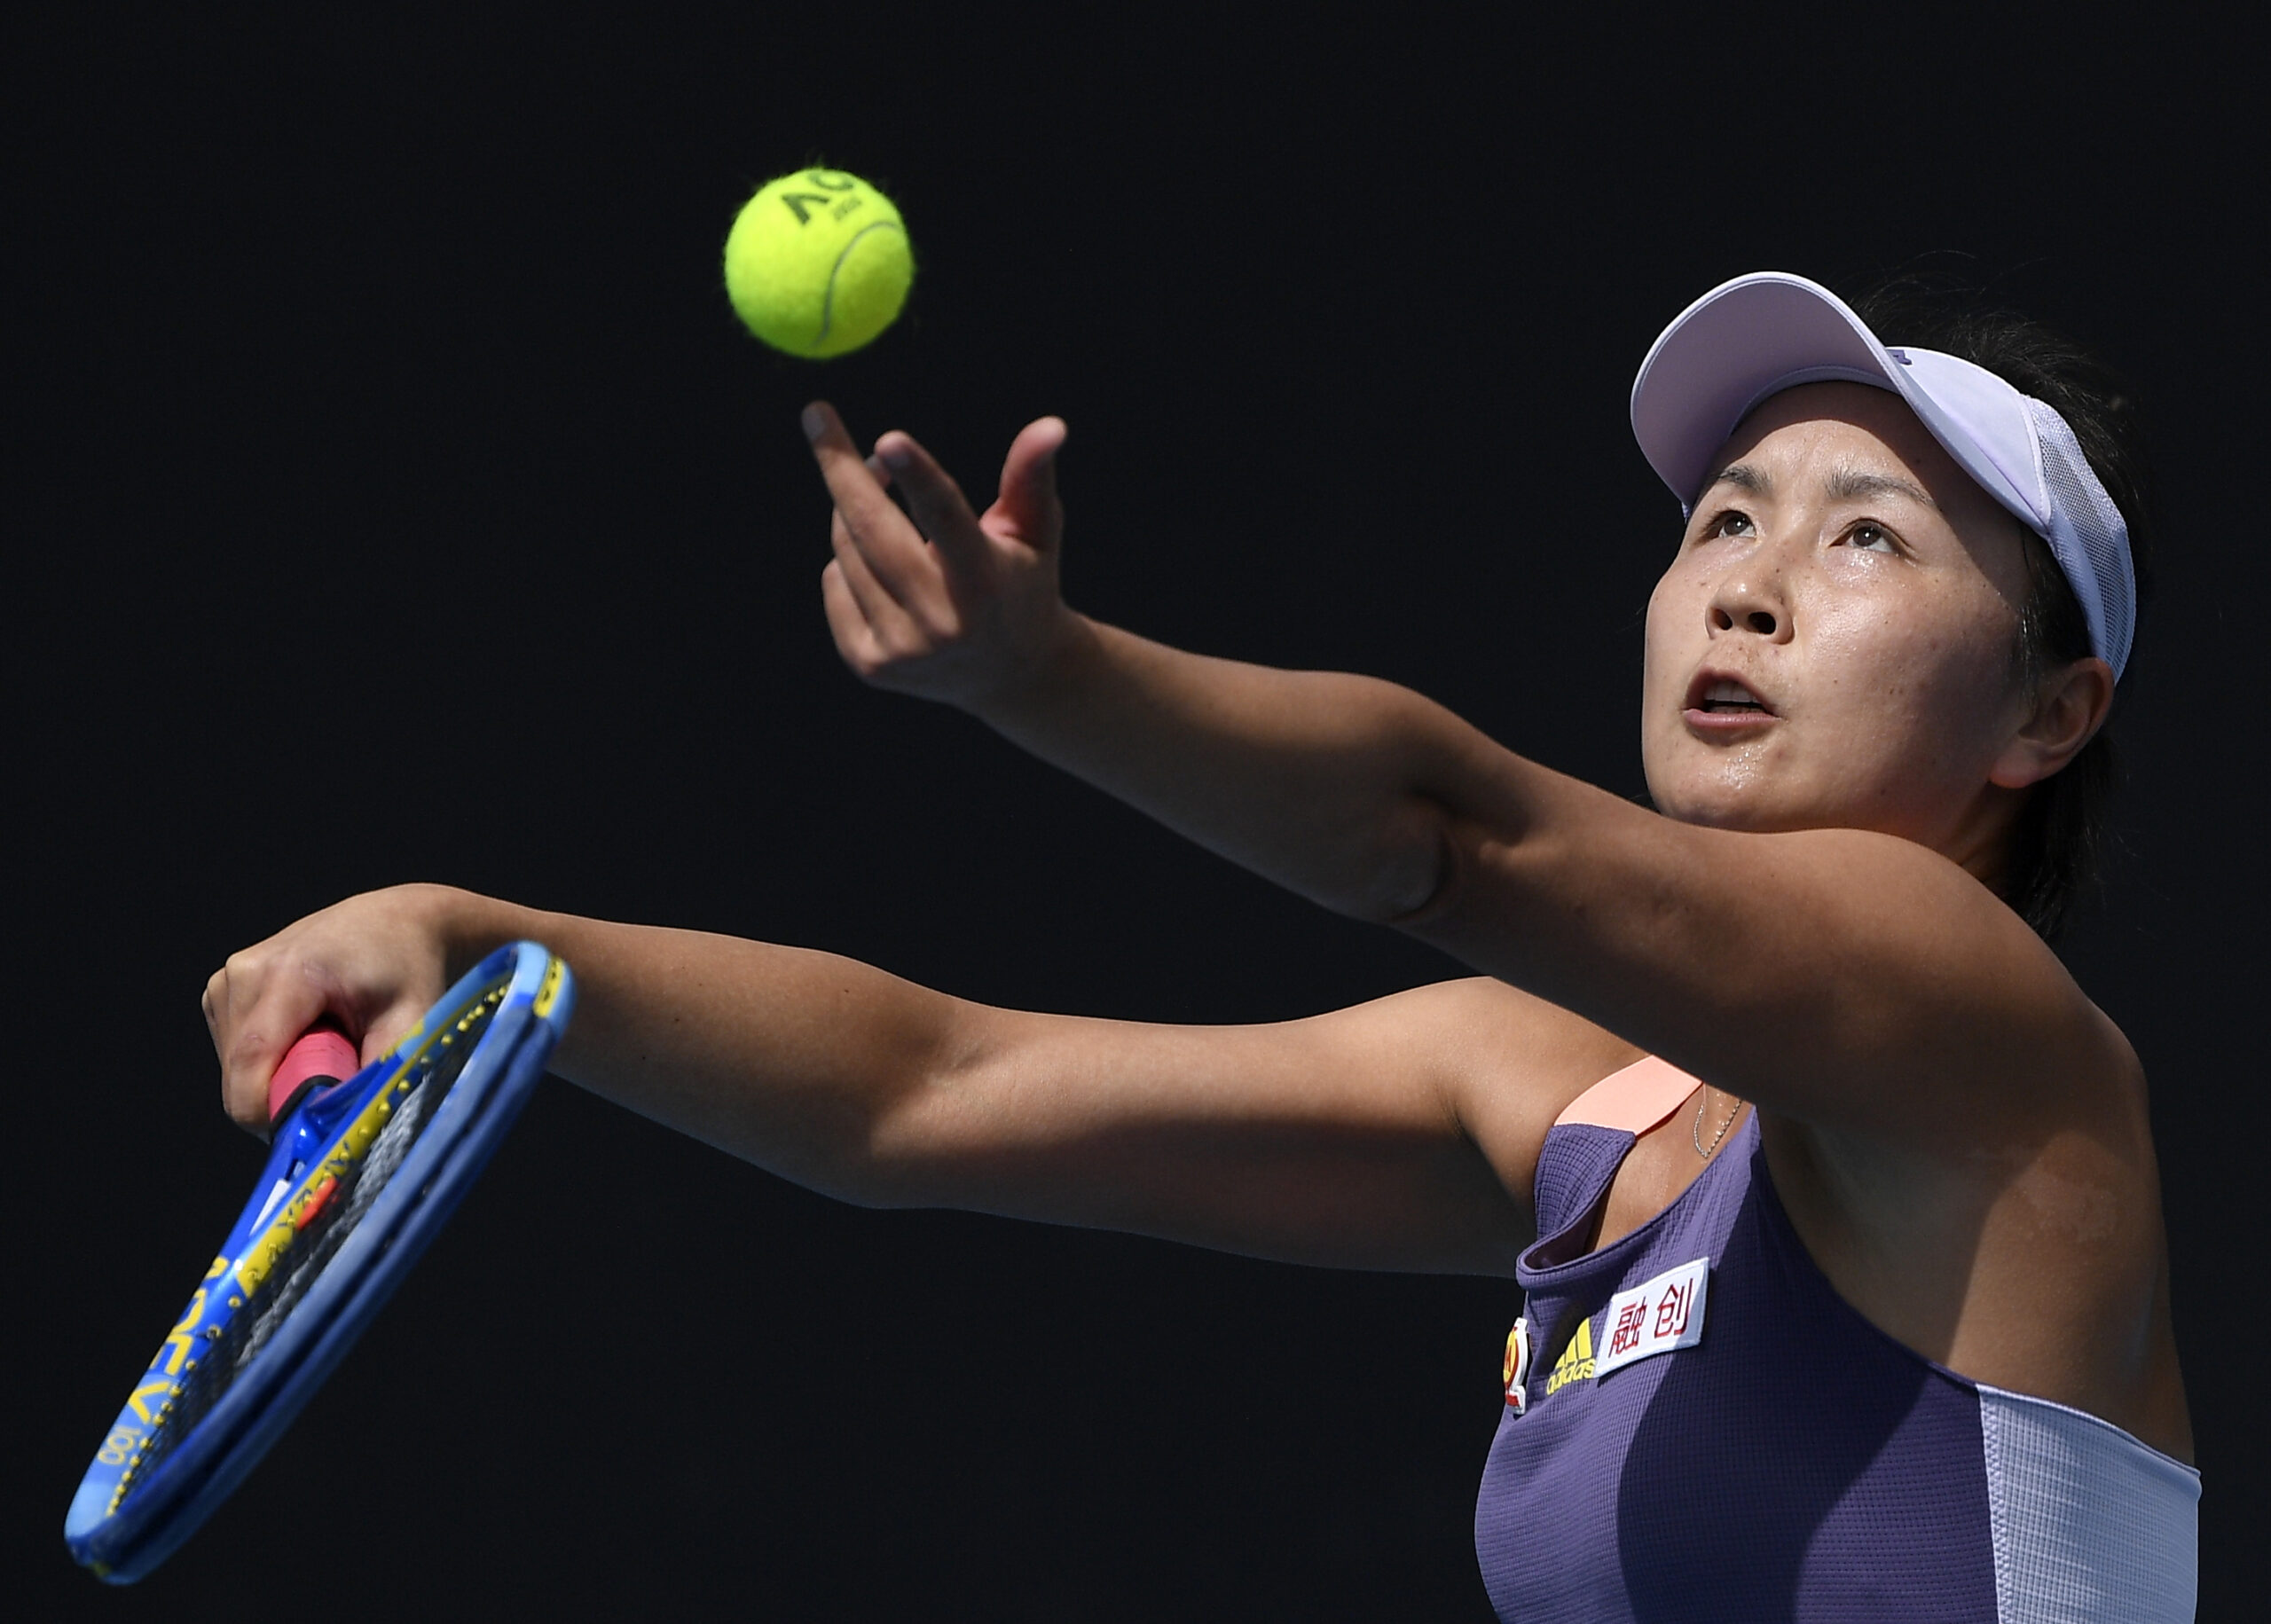 FILE - China's Peng Shuai serves to Japan's Nao Hibino during their first round singles match at the Australian Open tennis championship in Melbourne, Australia, on Jan. 21, 2020. The whereabout of Peng remains a pressing question at the Beijing Olympics. Peng’s accusations of sexual assault months ago against former vice premier Zhang Gaoli, once a member of the all-powerful Politburo Standing Committee, were scrubbed almost immediately from the internet in China. (AP Photo/Andy Brownbill, File)